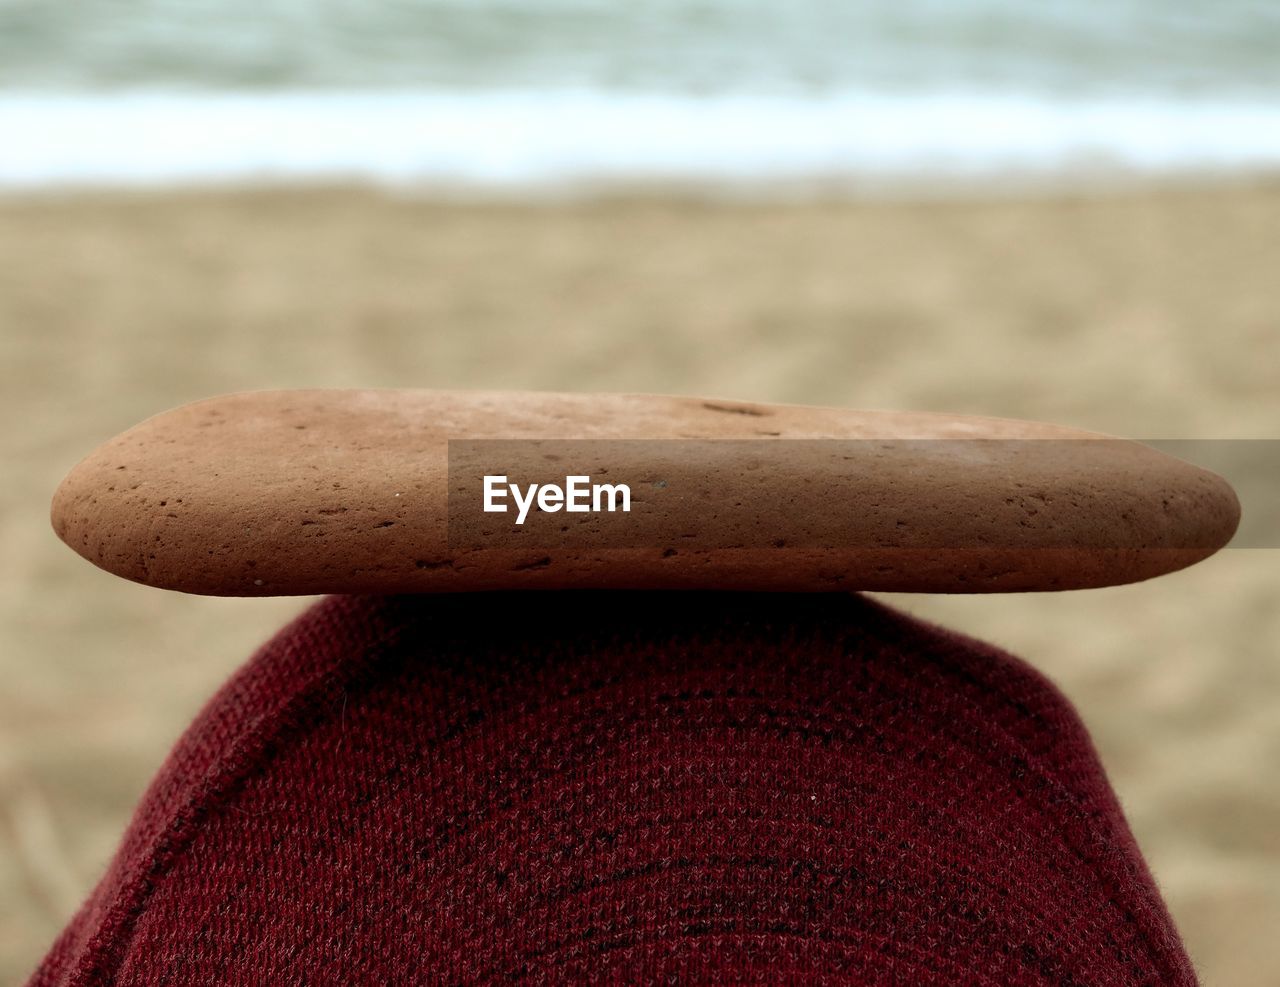 land, close-up, focus on foreground, beach, brown, sea, water, sand, red, nature, hand, day, outdoors, wood, sports